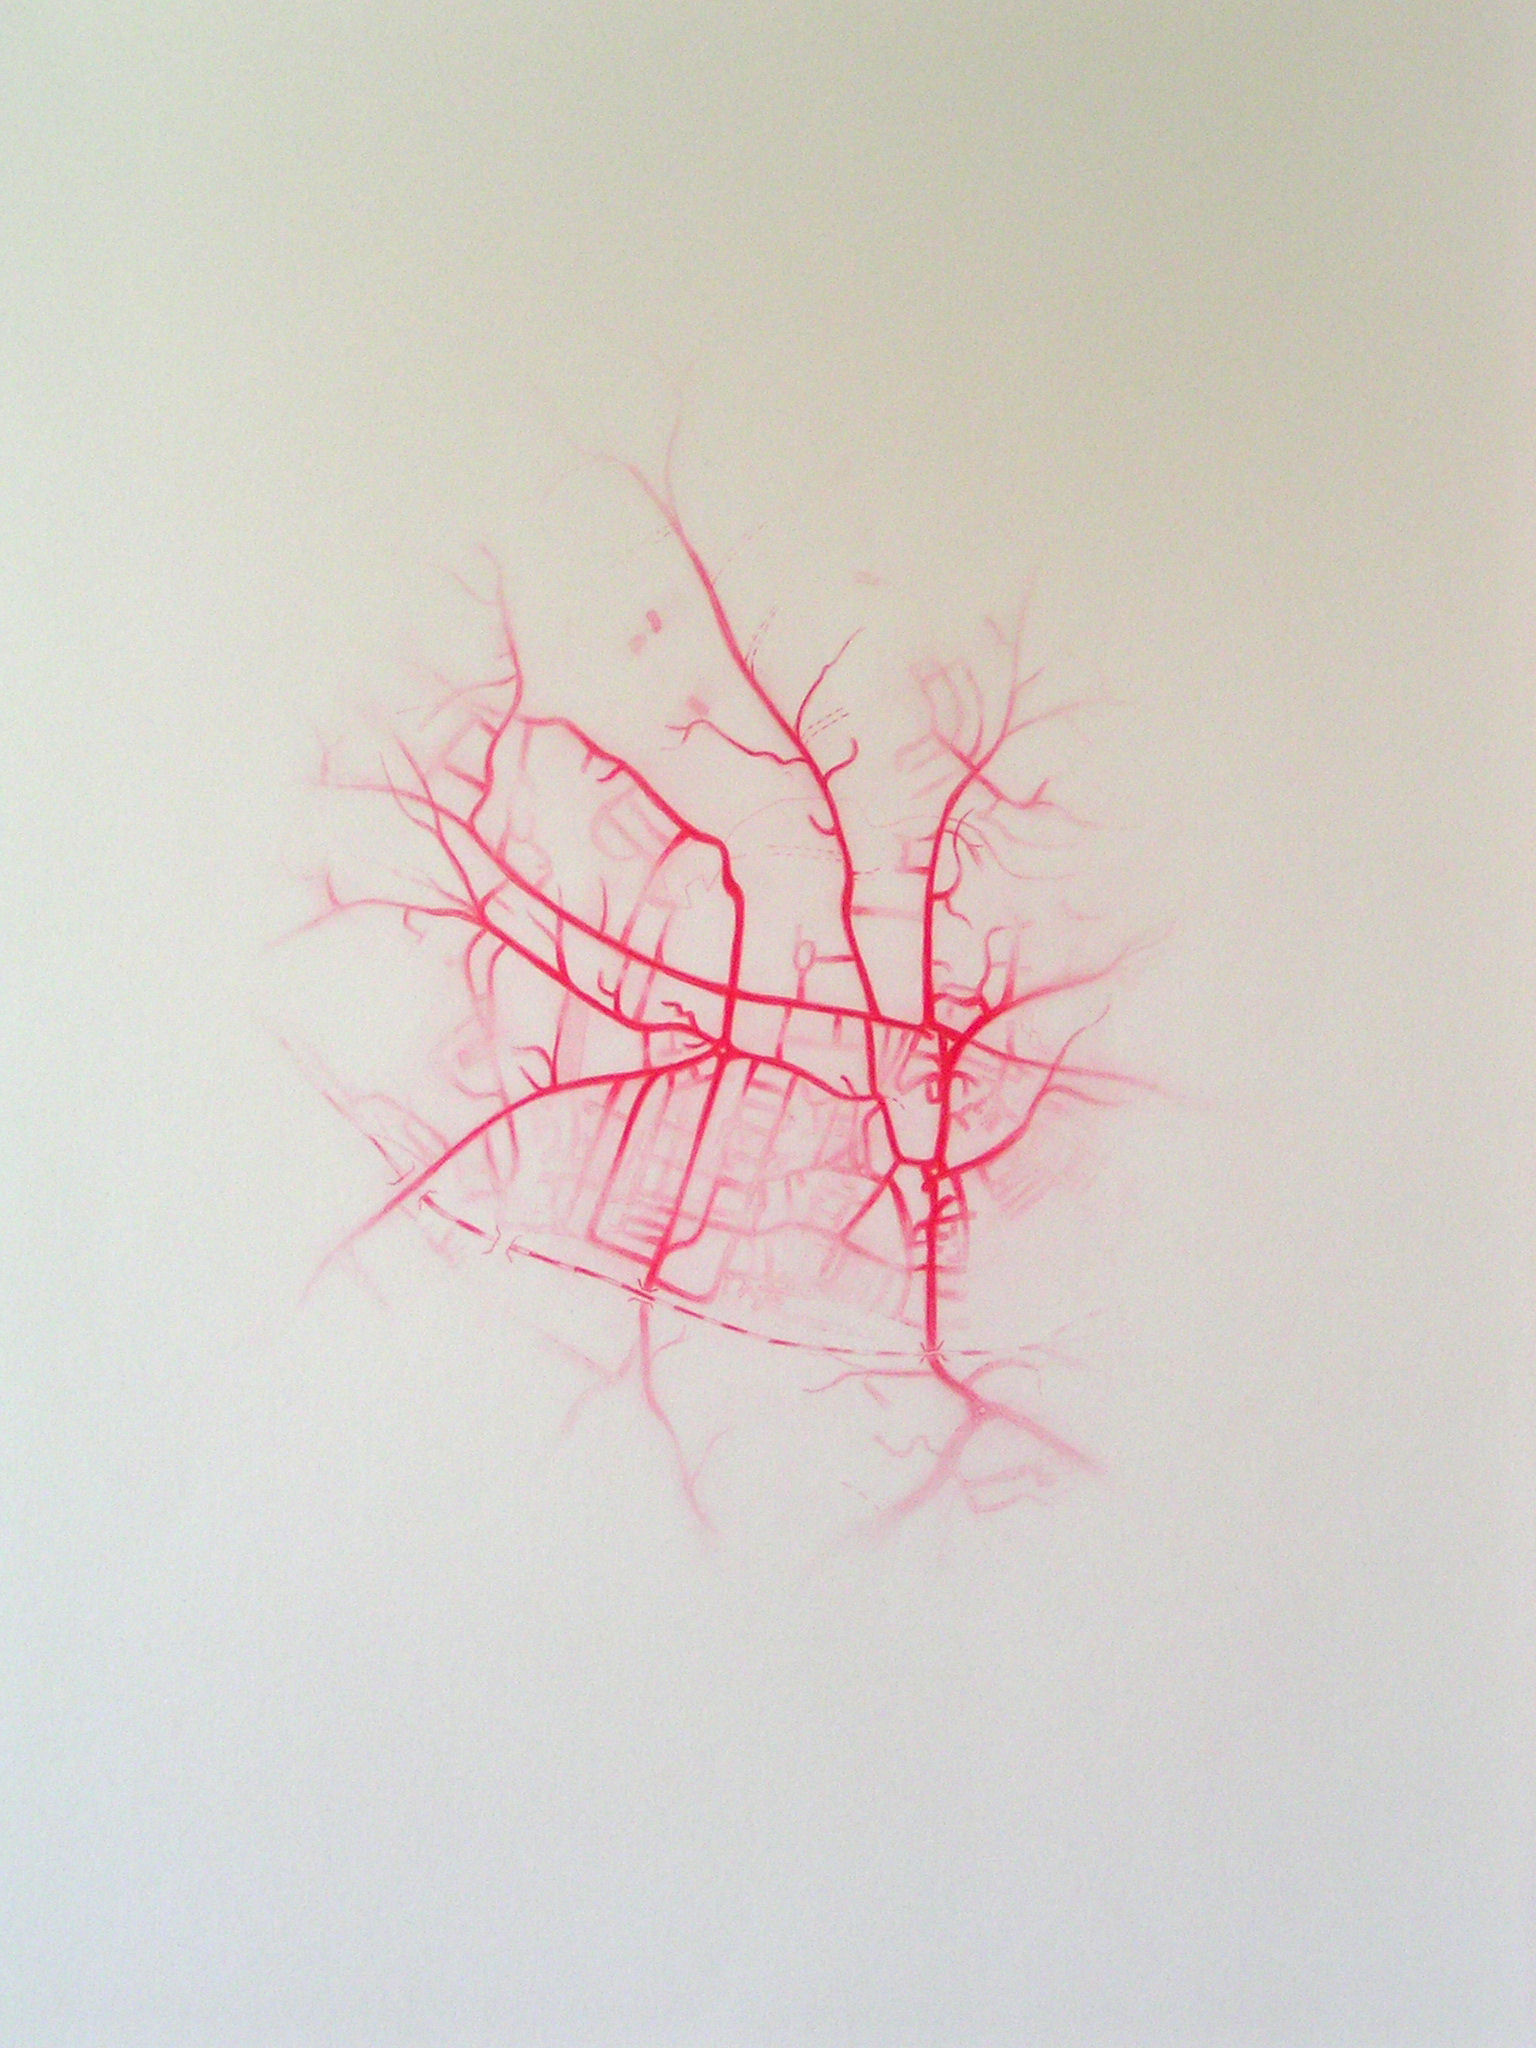 Emma J Williams 'Untitled Red Drawing No.4' 2008 pencil on paper